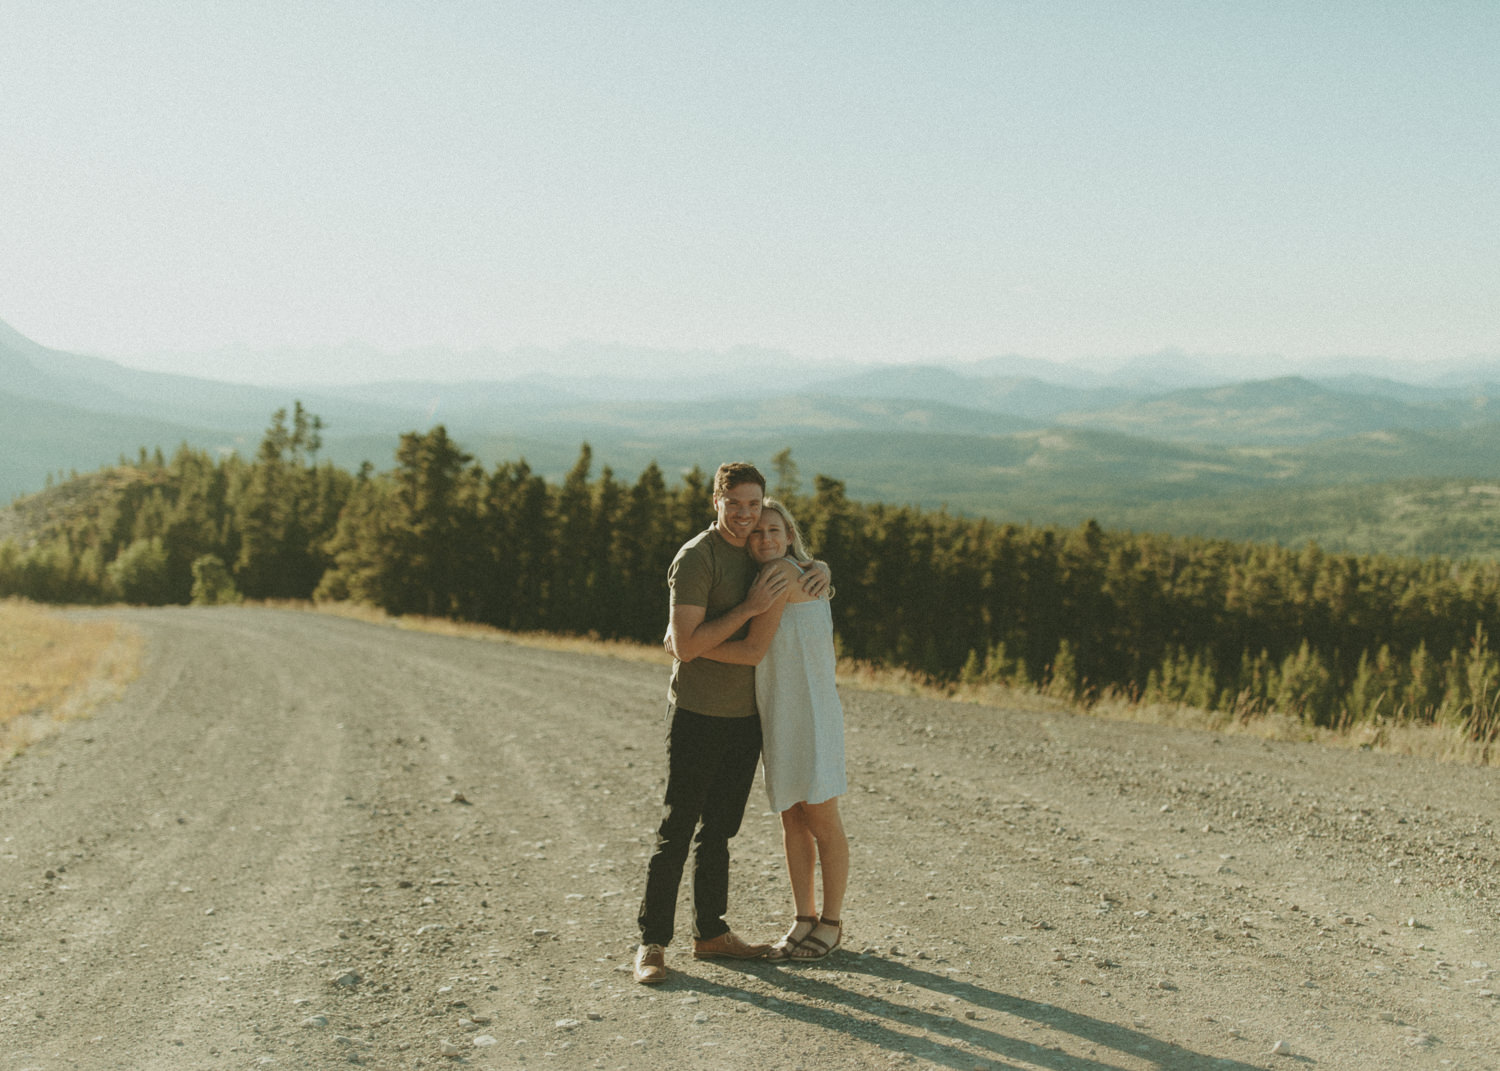 Couple hugging on a dirt road in the mountains